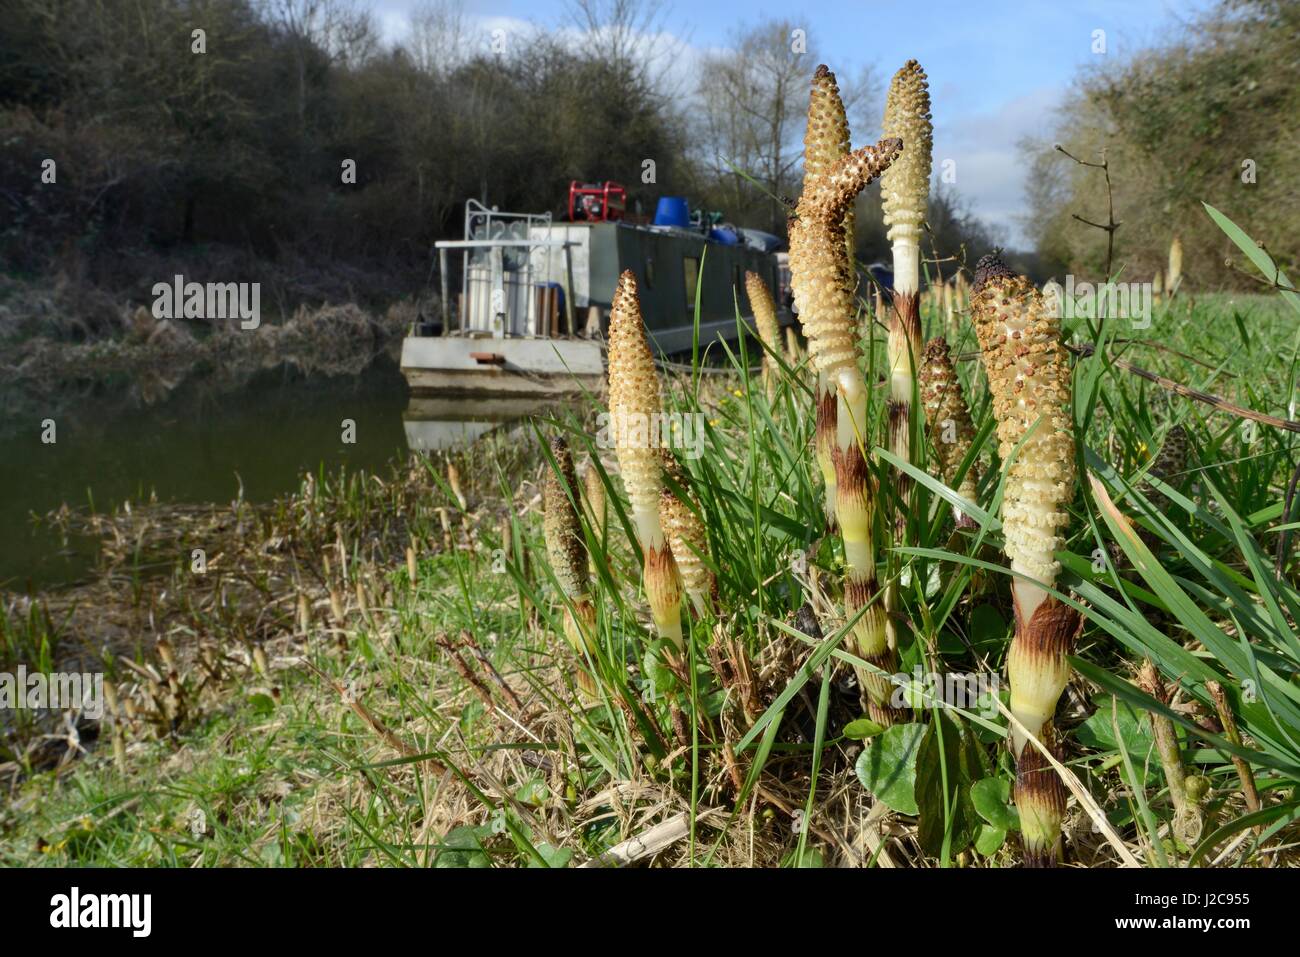 Stand of Great horsetail (Equisteum telmateia) spore cones emerging from canal bank, Bathampton, Bath and northeast Somerset, UK, March. Stock Photo